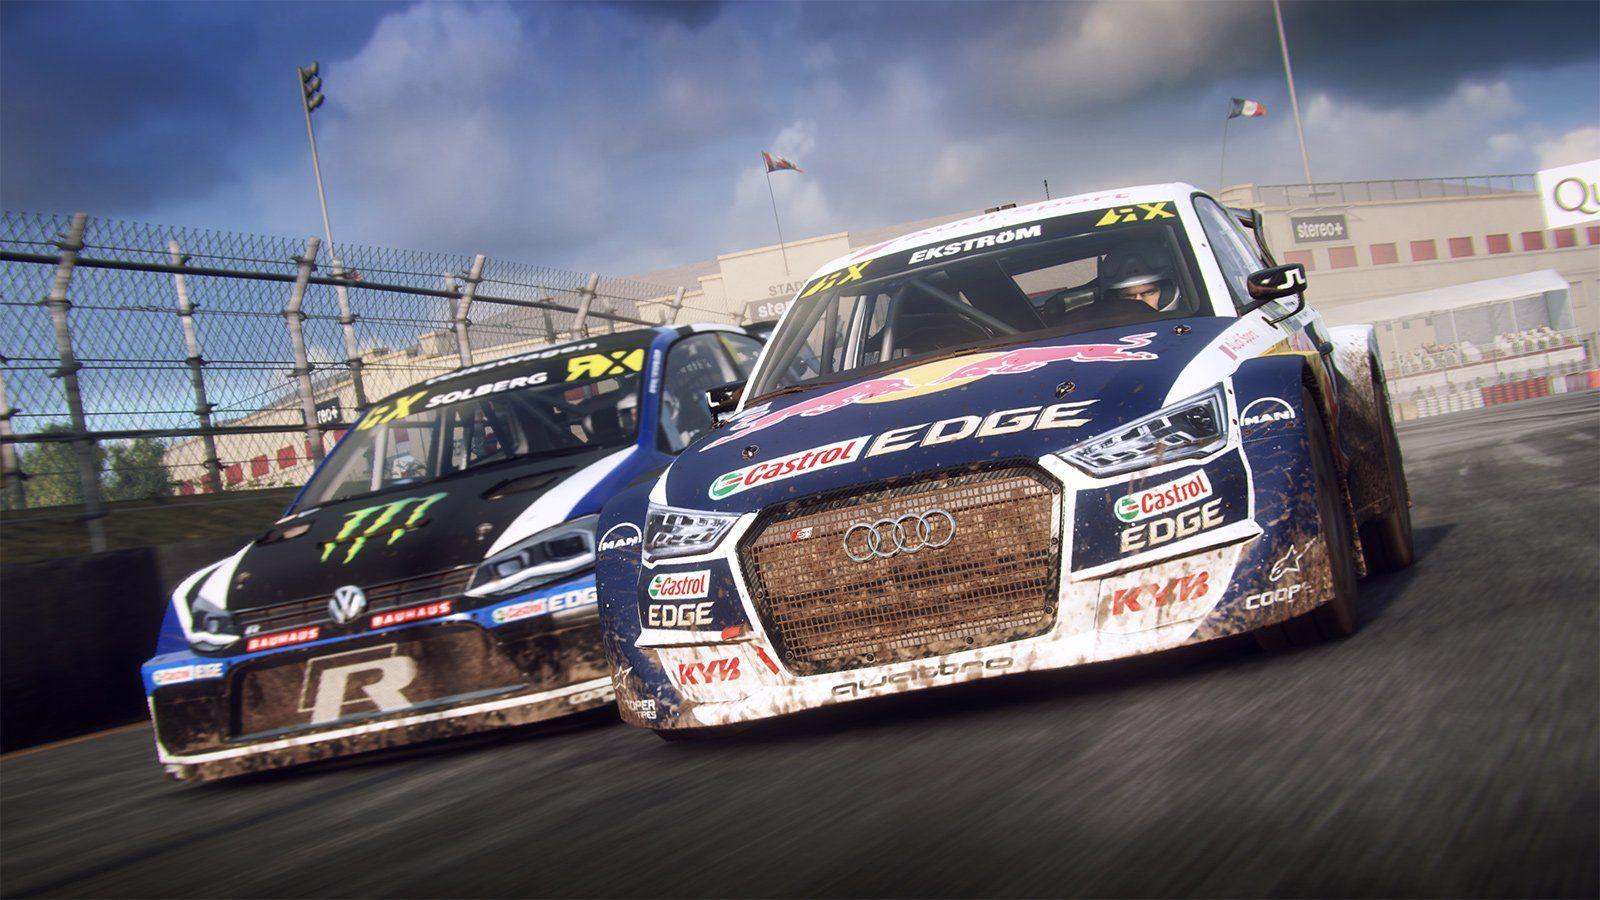 DiRT Rally 2.0 Announced For PC And Consoles; Launches In February 2019